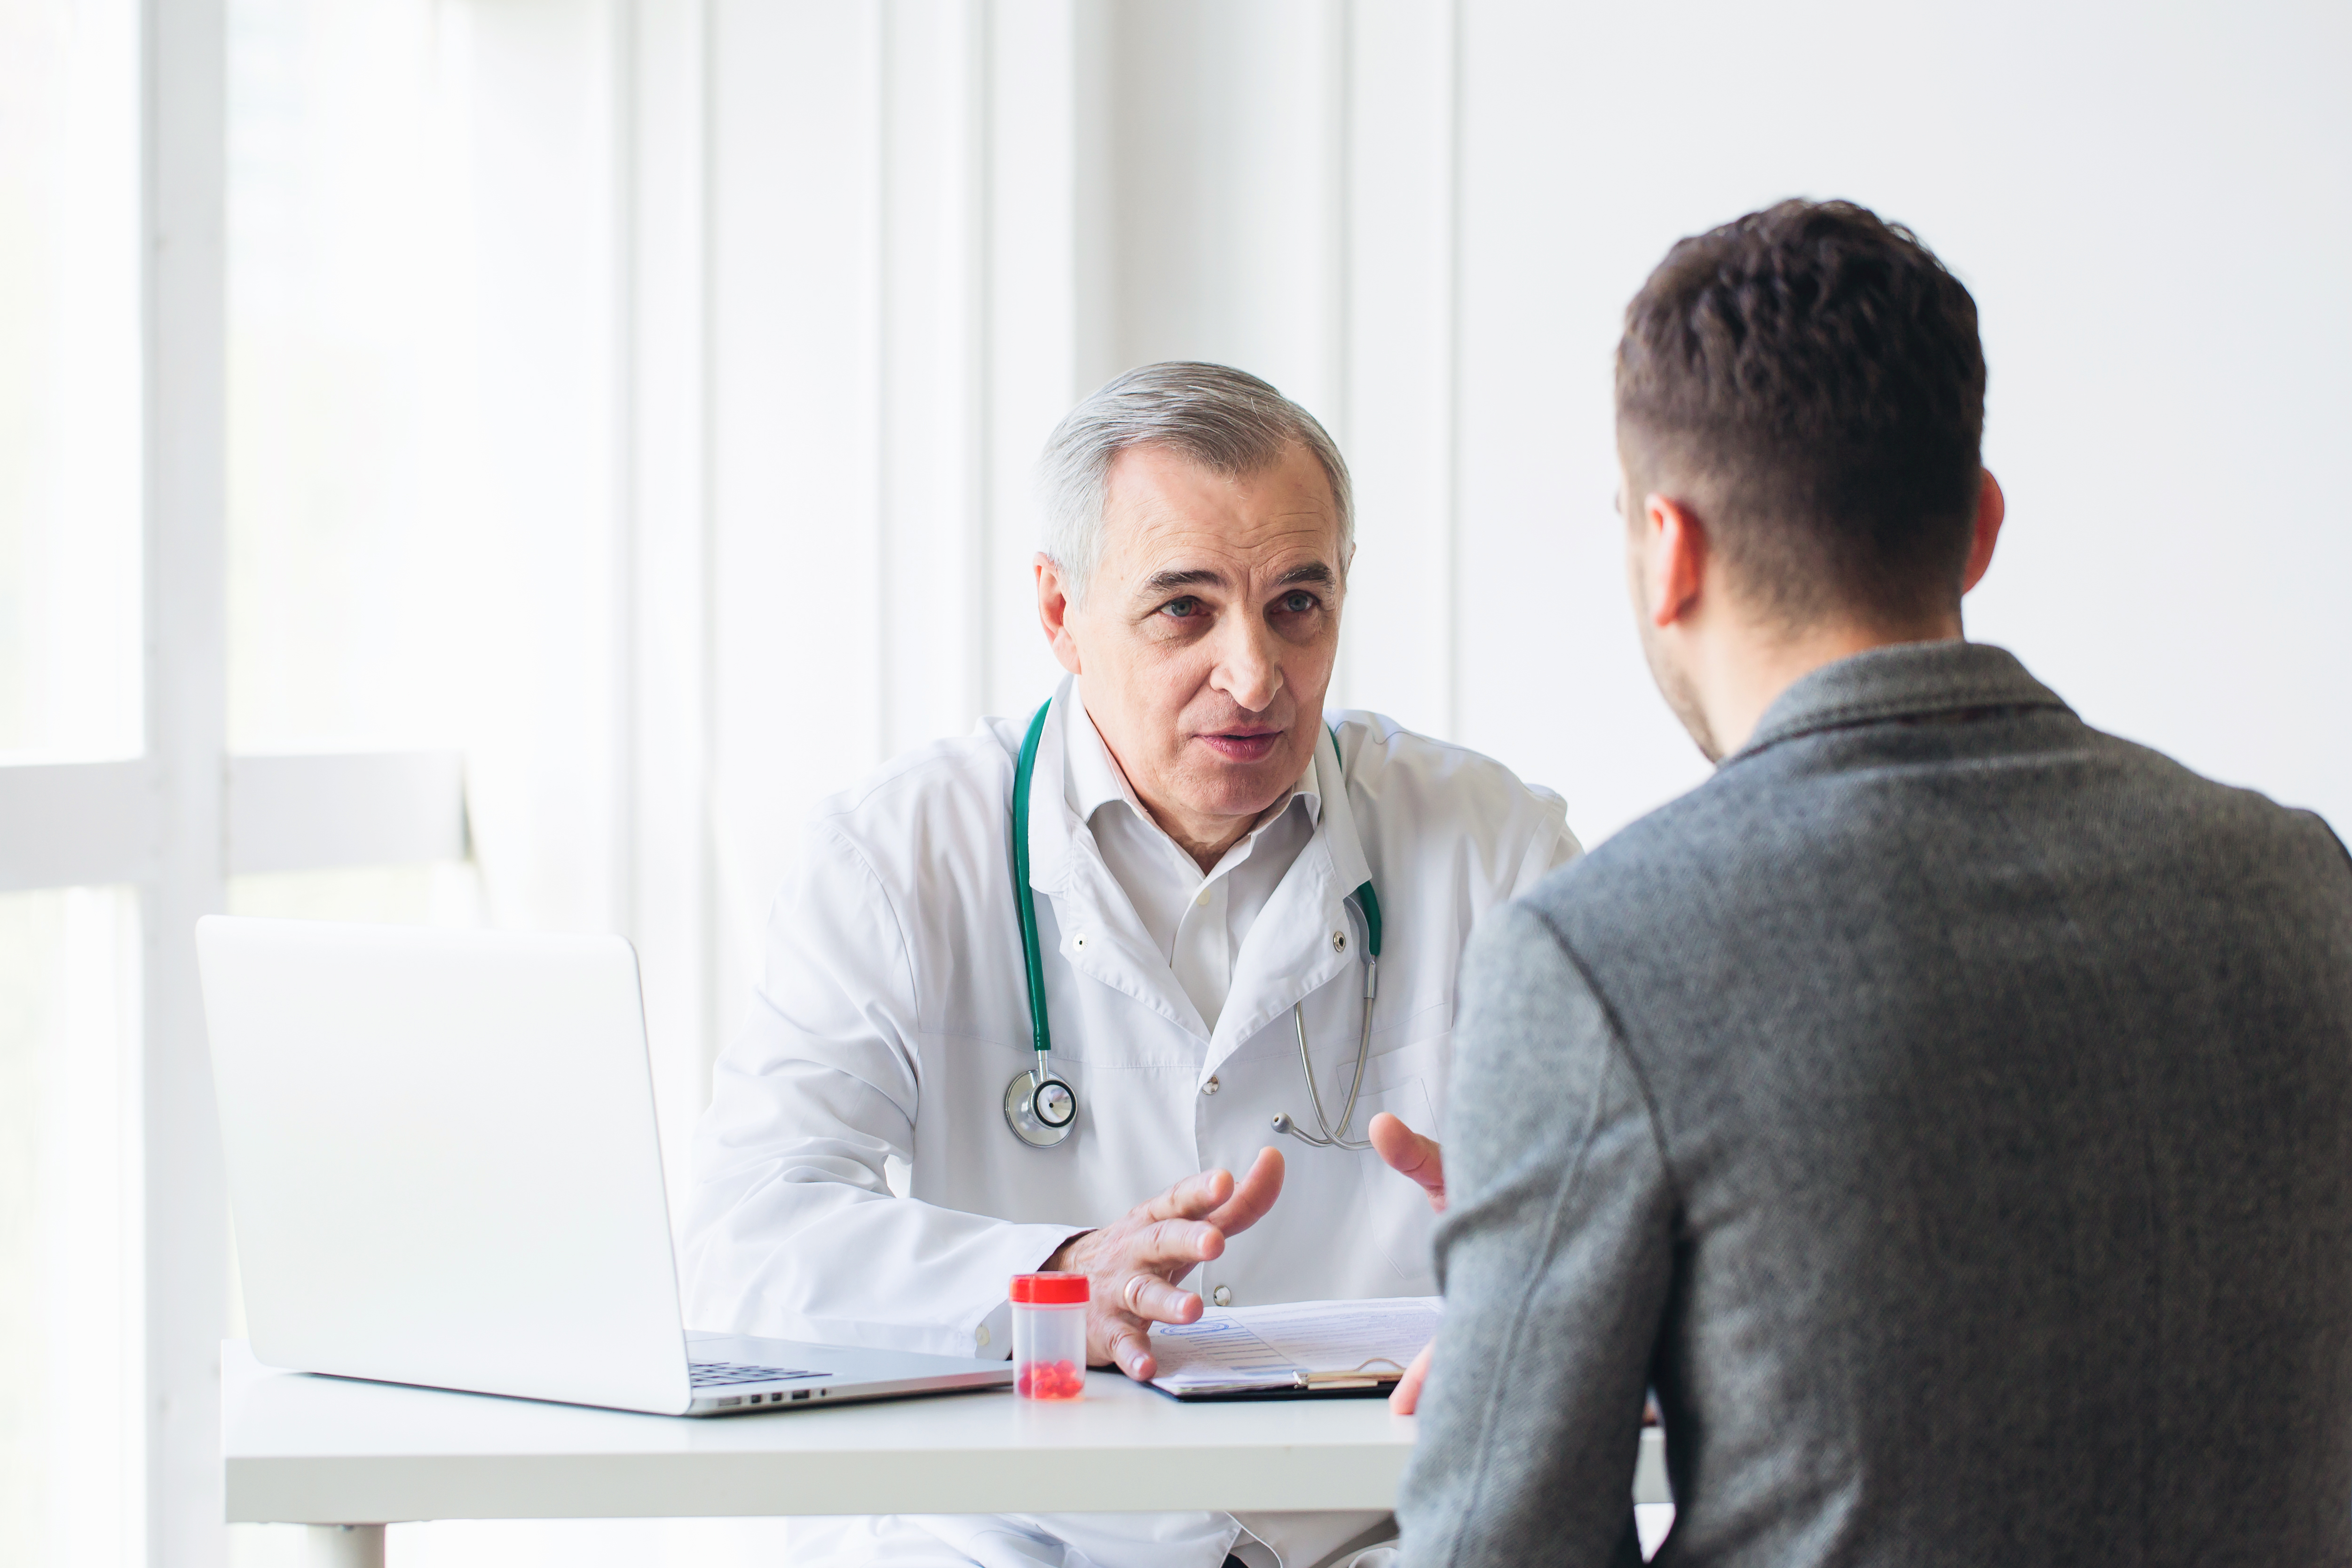 A doctor consults with a patient. Shutterstock image via user uzhursky